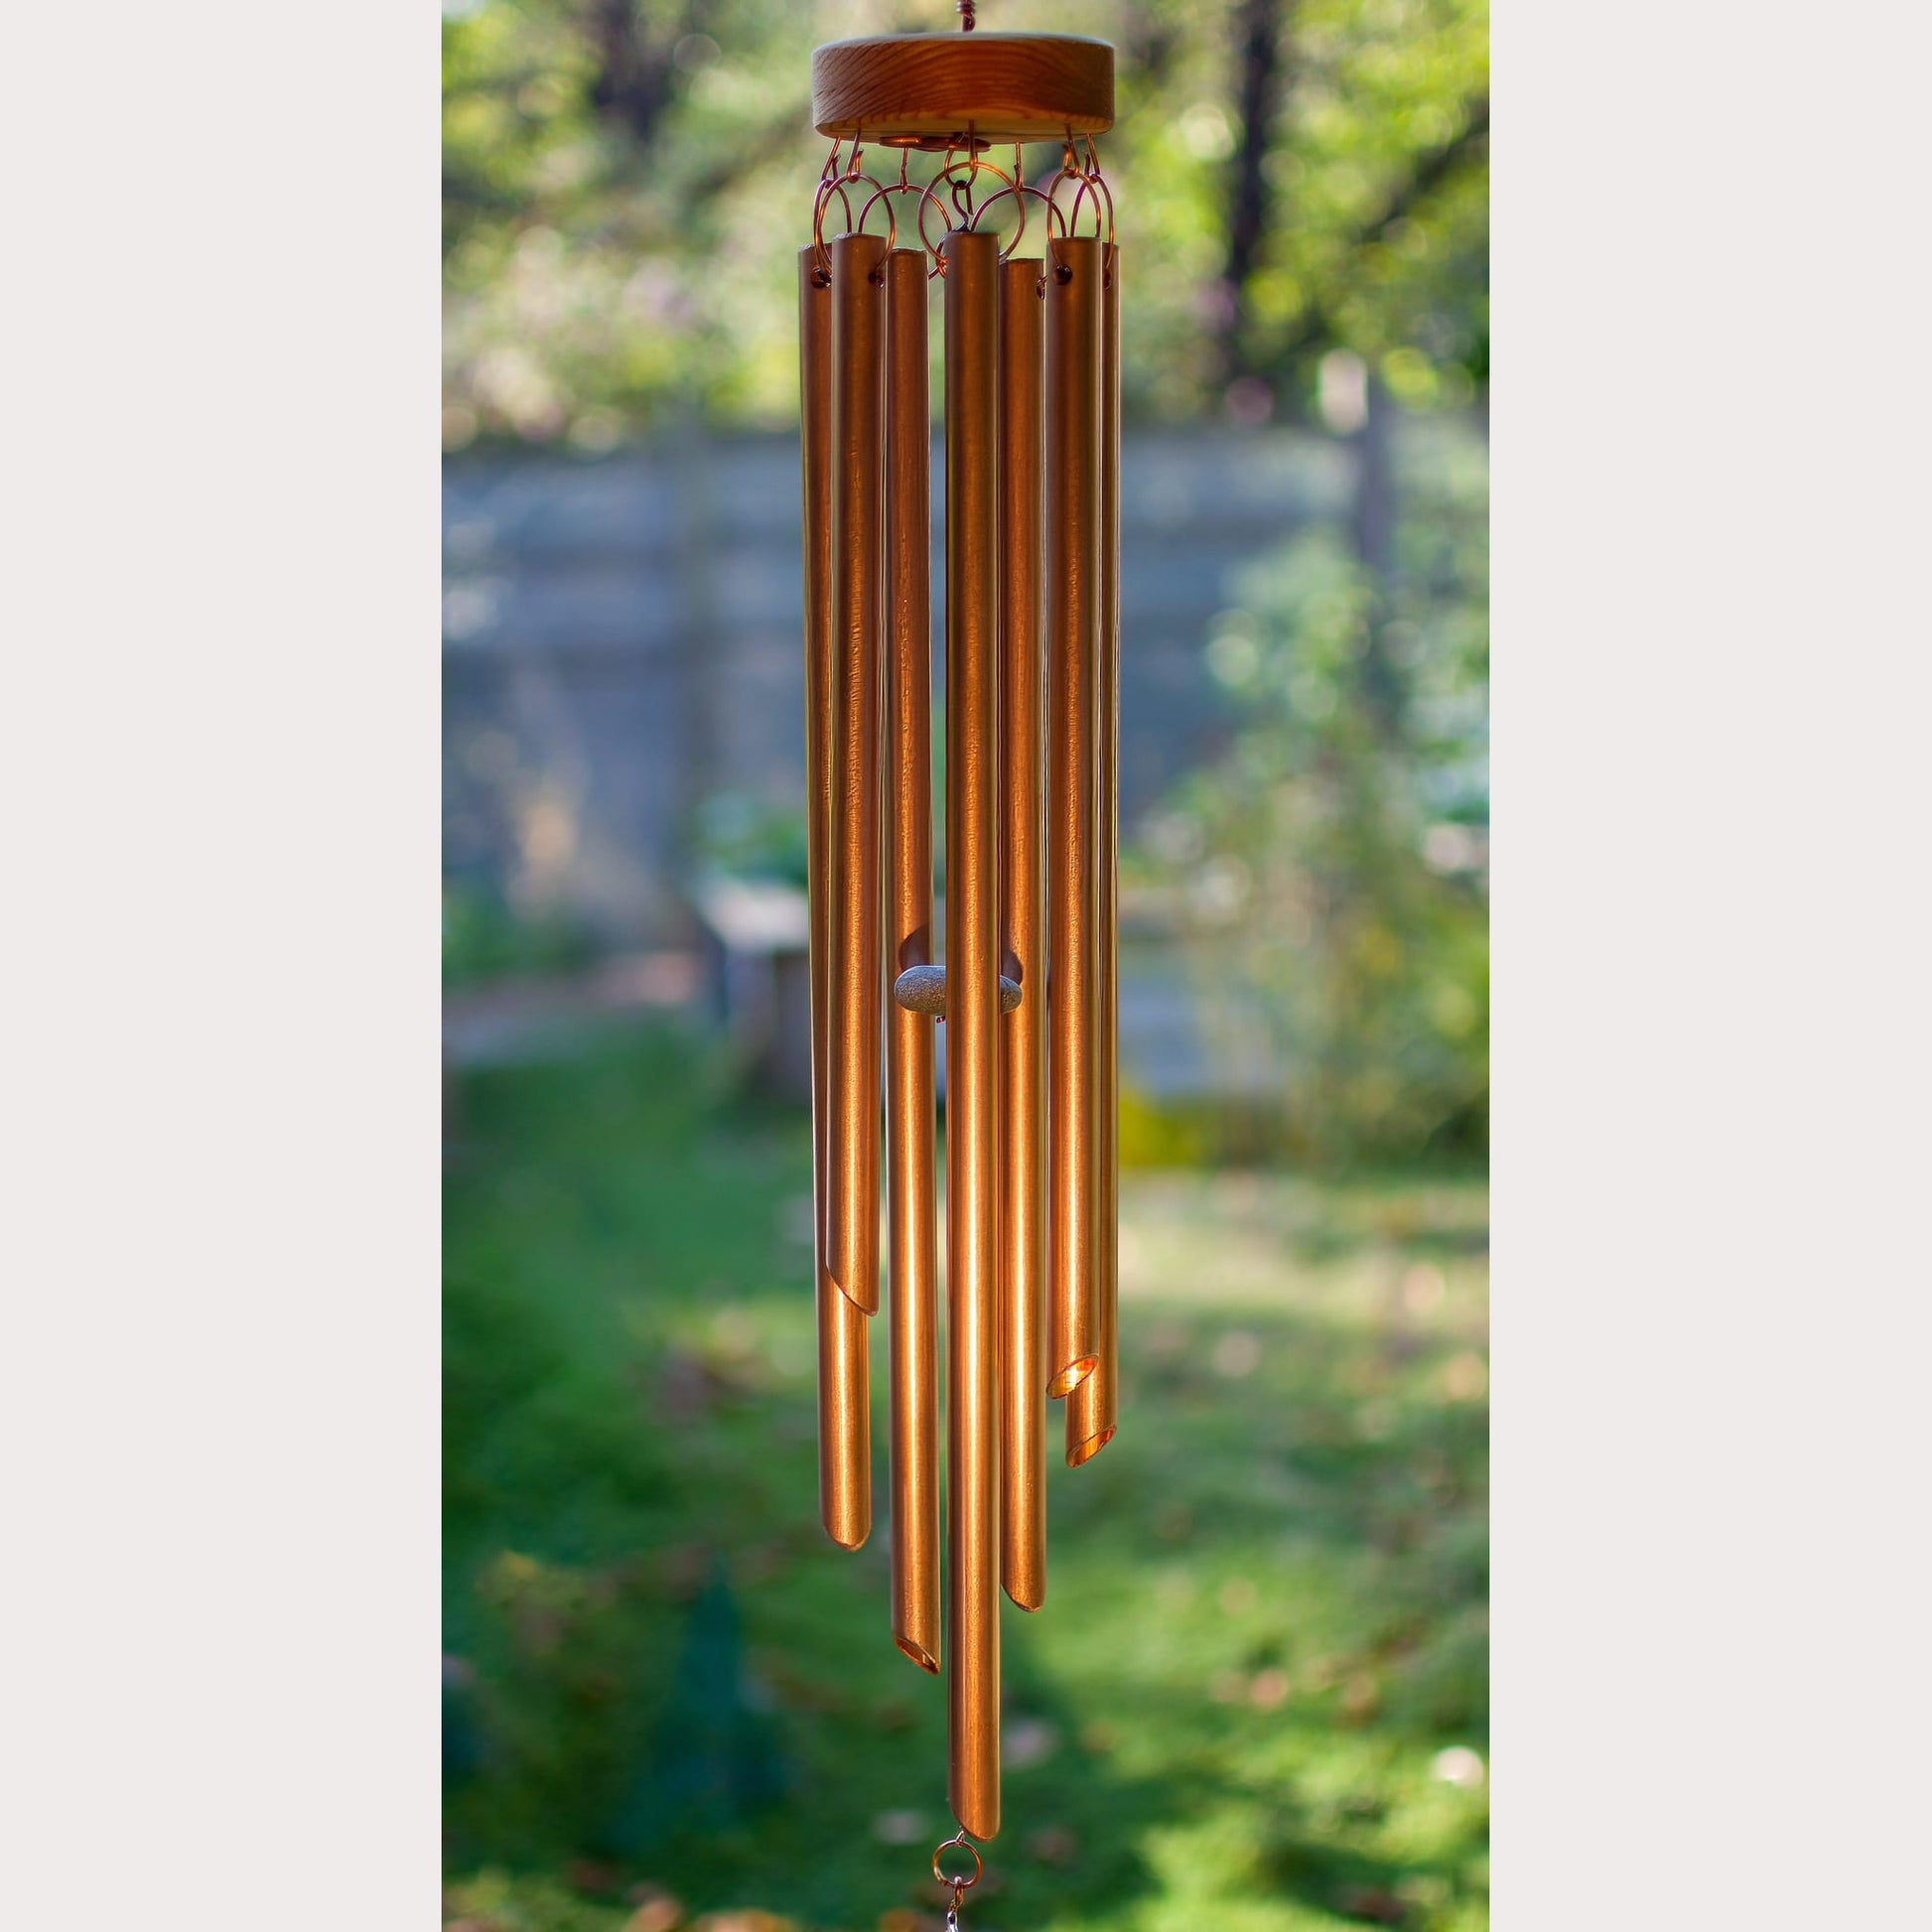 detail copper wind chime